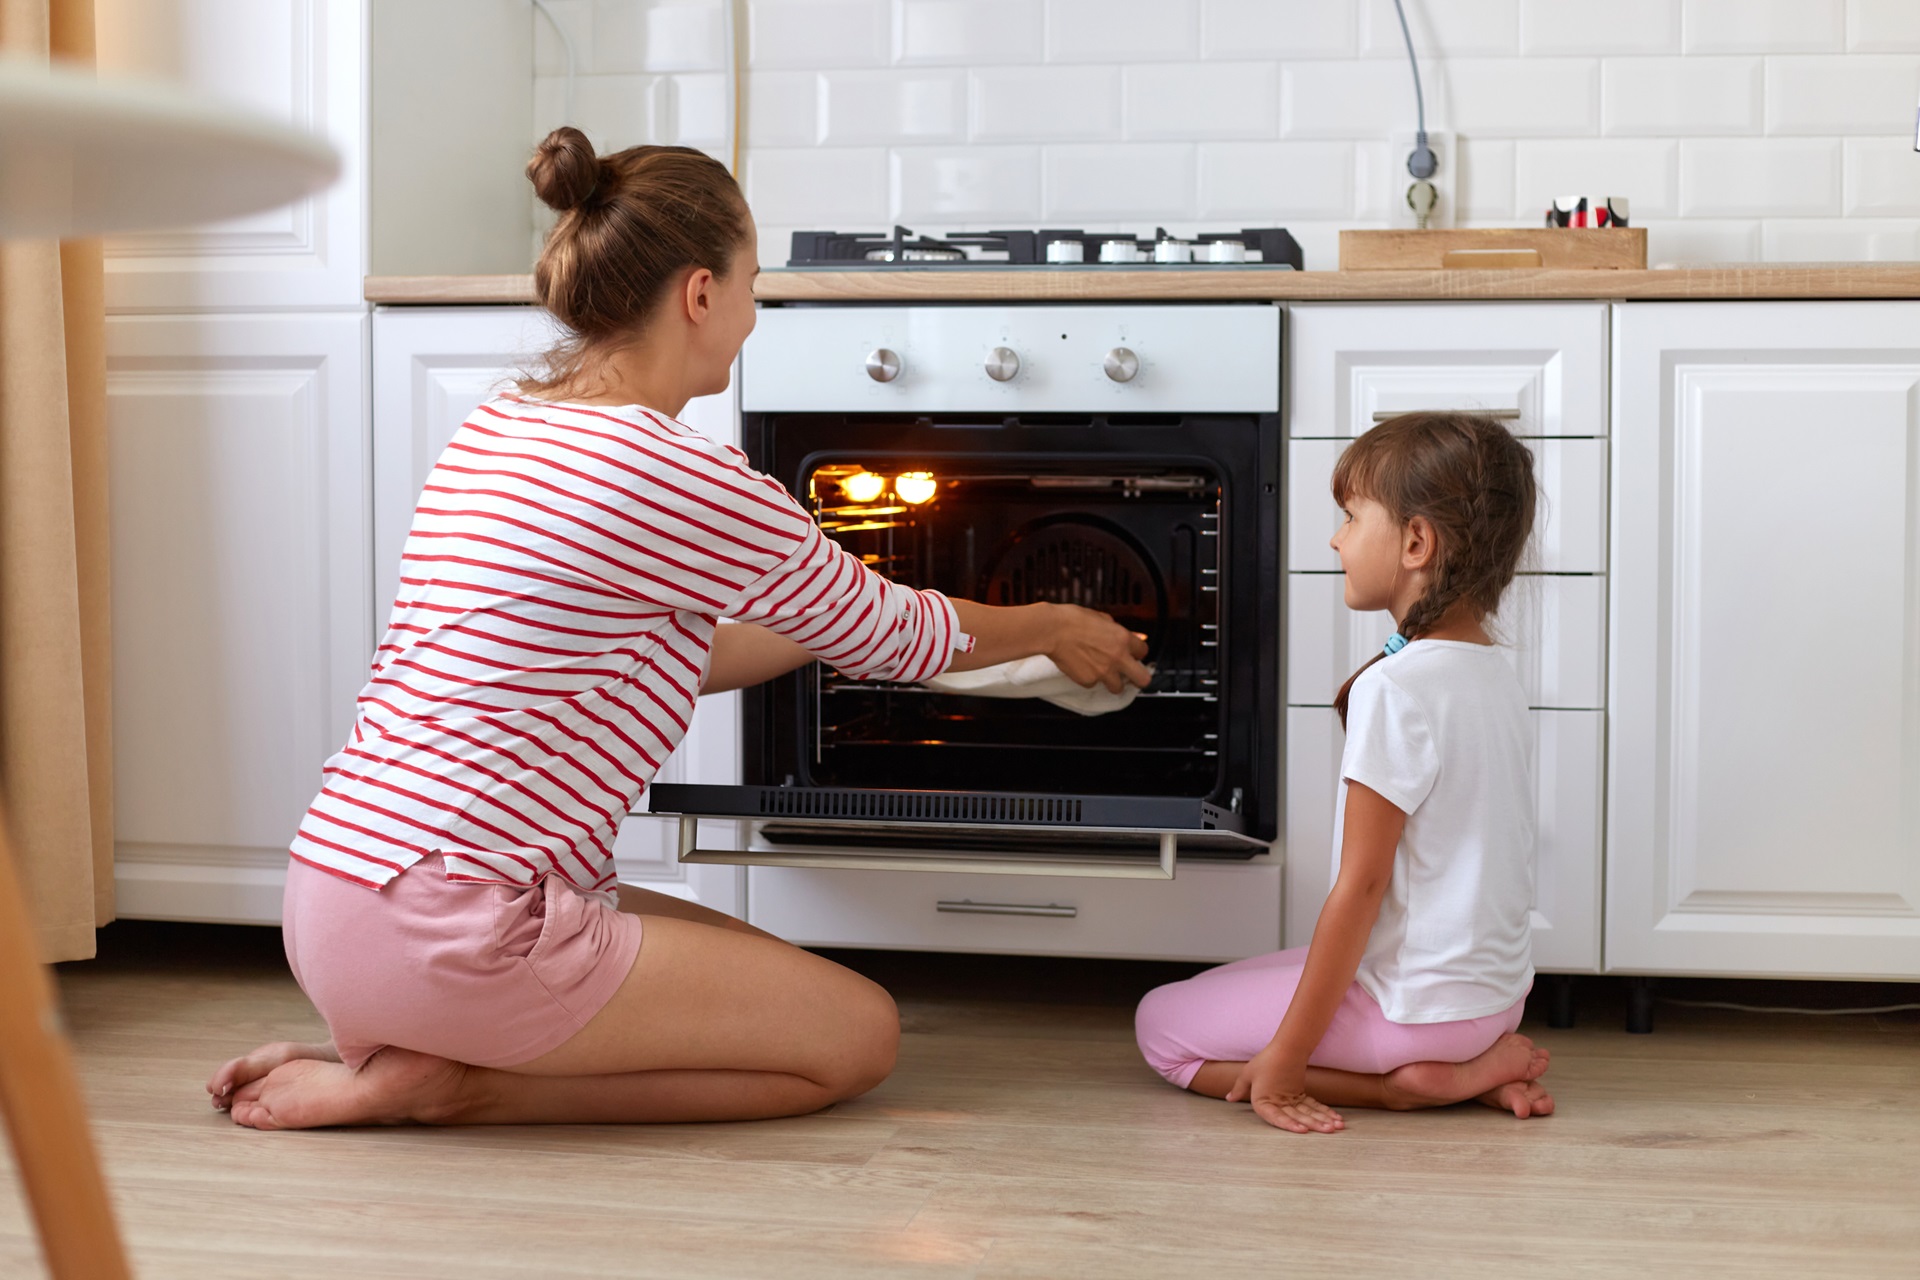 Mother and daughter kneeling on the floor putting food in an oven